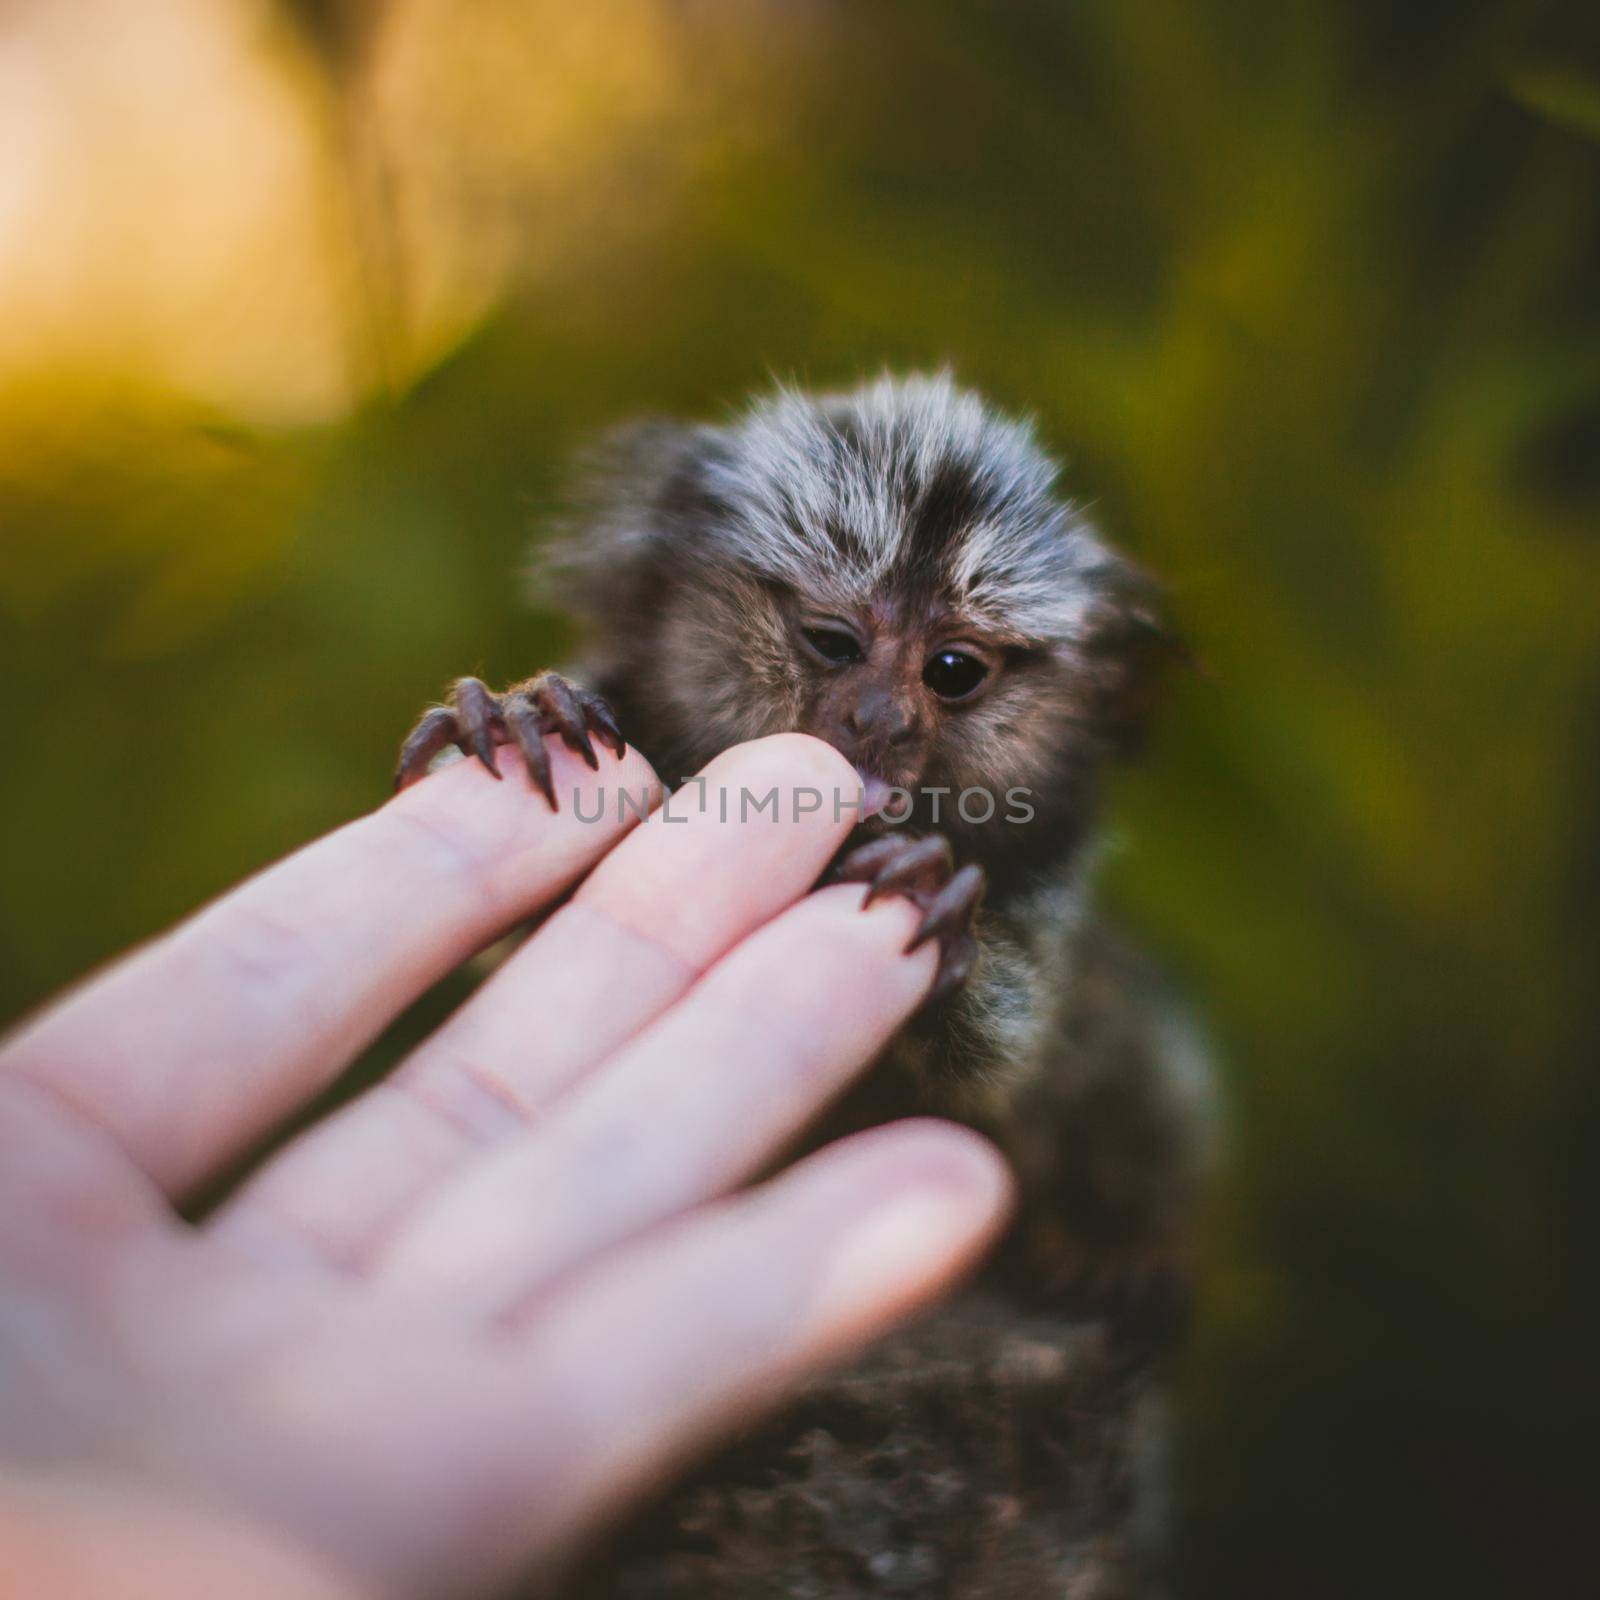 The common marmoset baby on the branch in summer garden with humsn hand by RosaJay